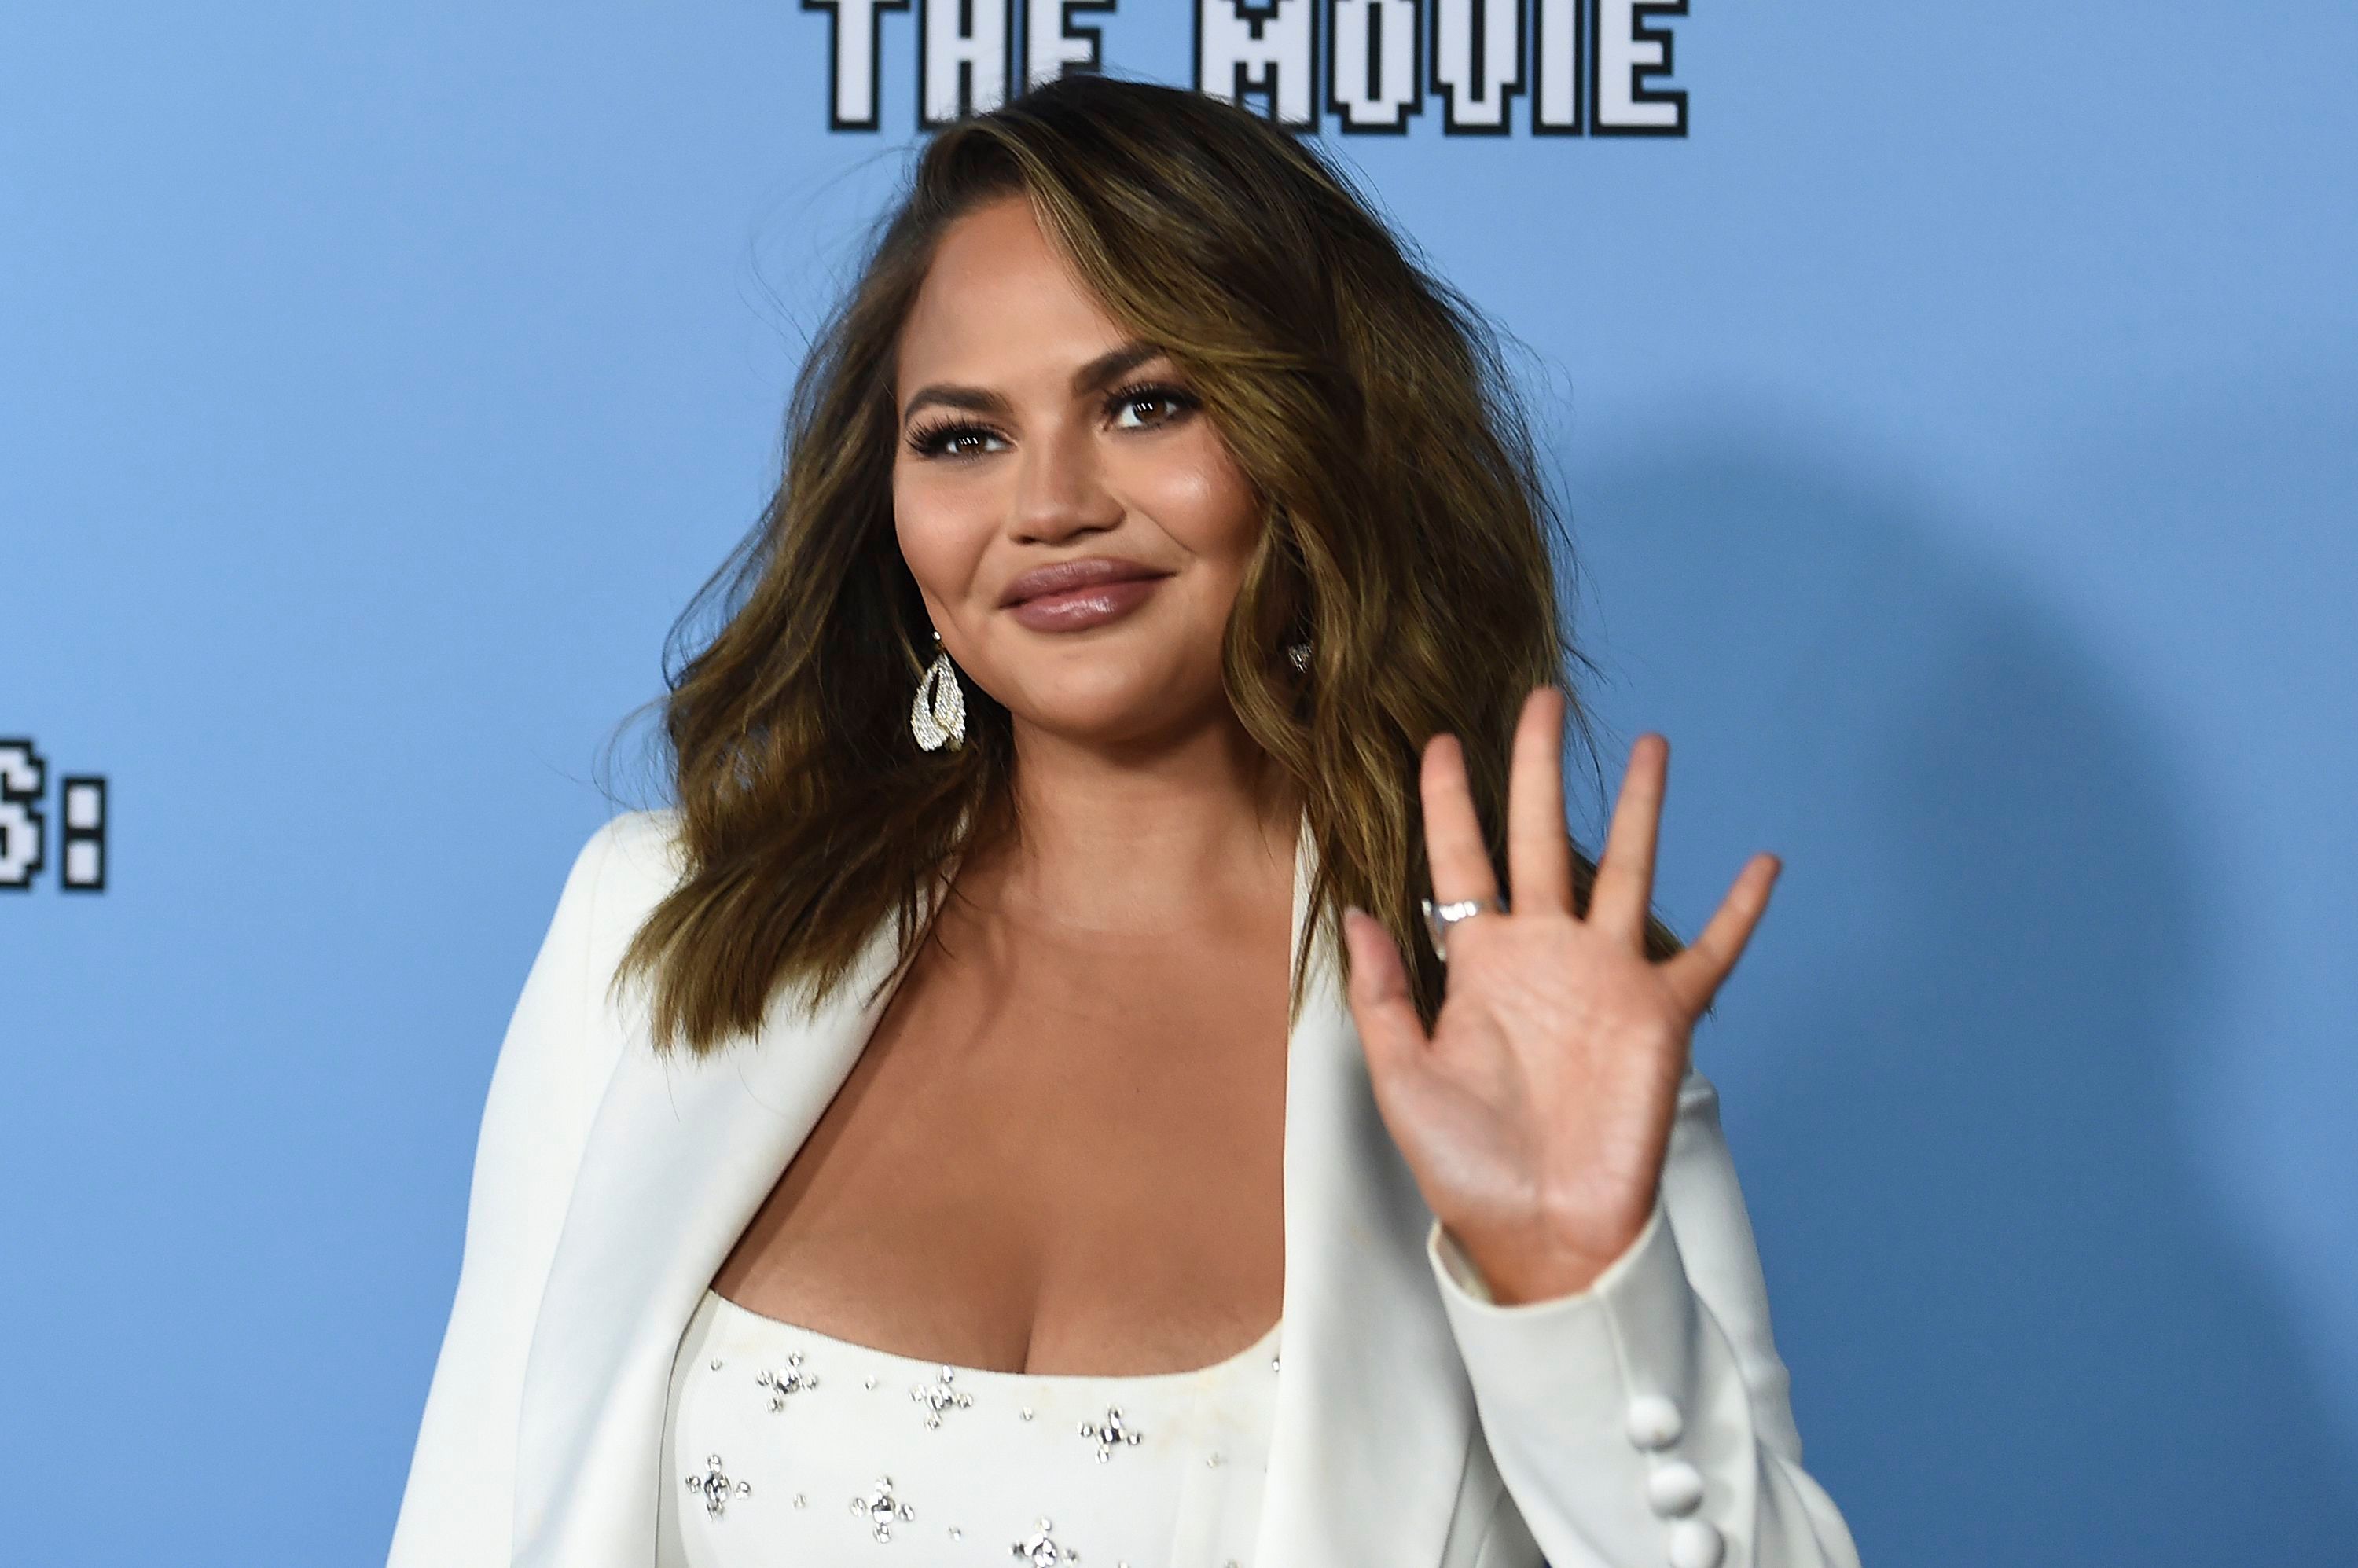 Topless Beach Perky - Chrissy Teigen Removing Breast Implants: 'I'm Getting My Boobs Out!'